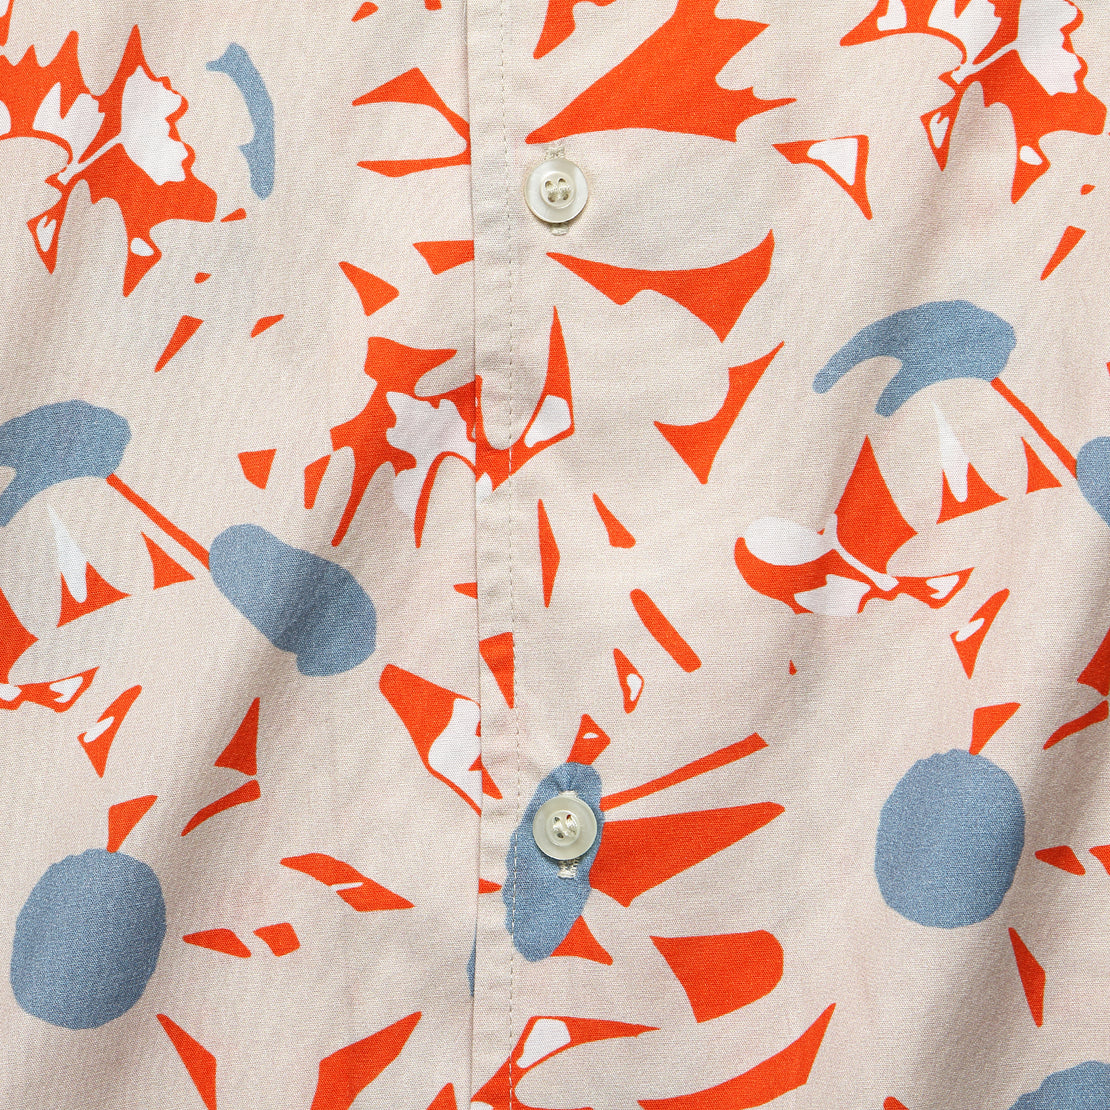 Orange Flowers Shirt - Orange/White - Bather - STAG Provisions - Tops - S/S Woven - Other Pattern